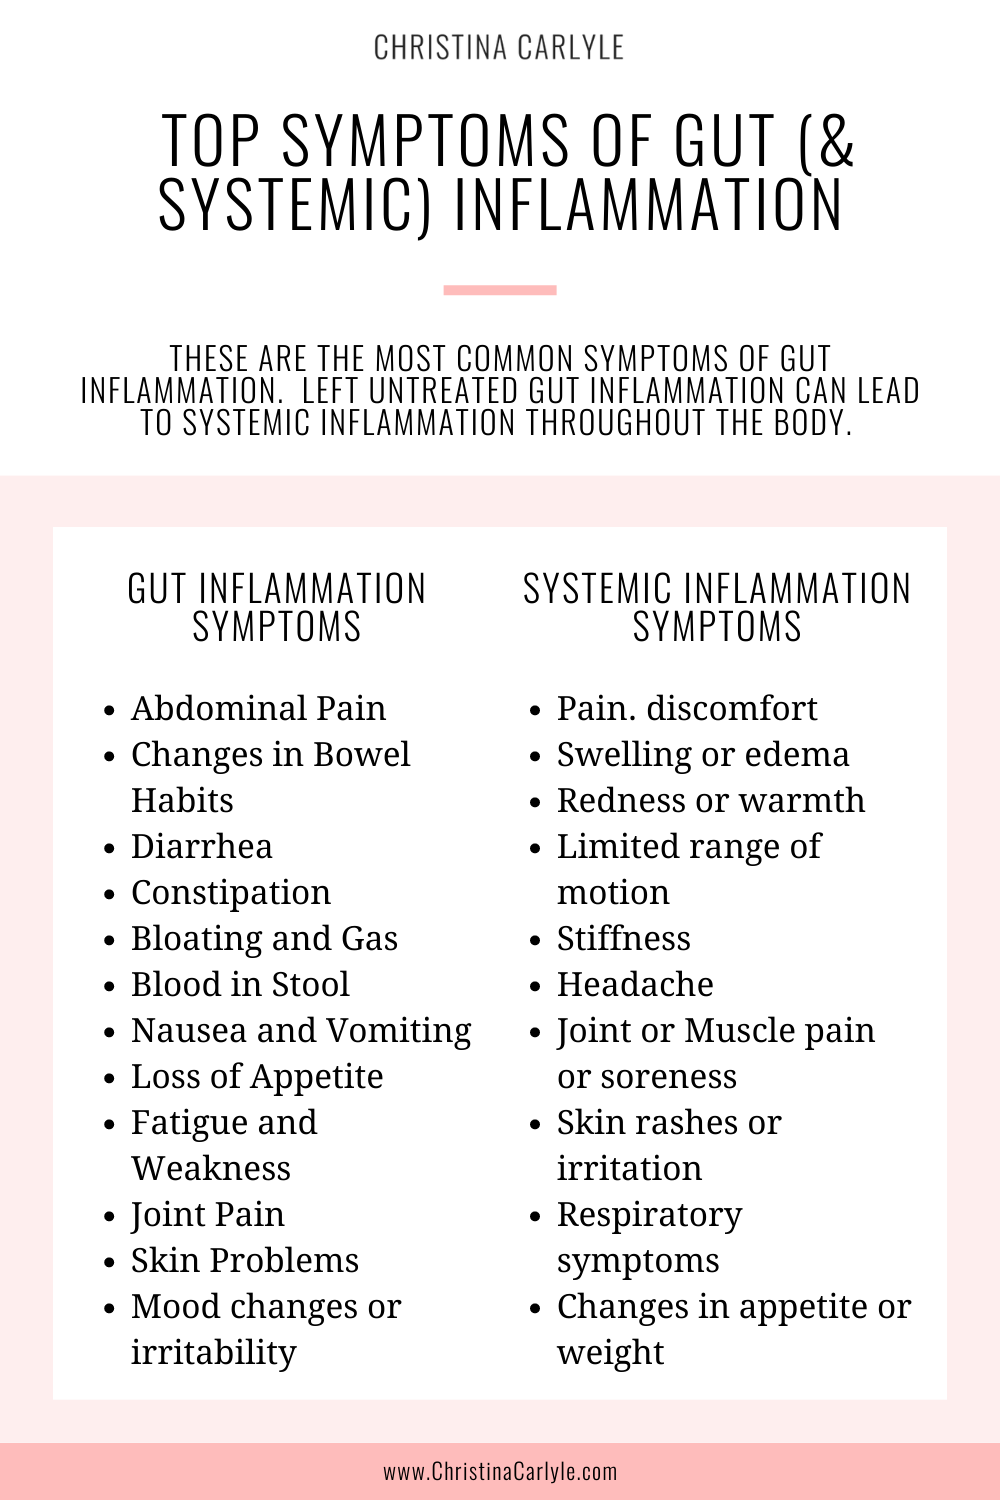 lists of the most common symptoms of gut inflammation and systemic inflammation